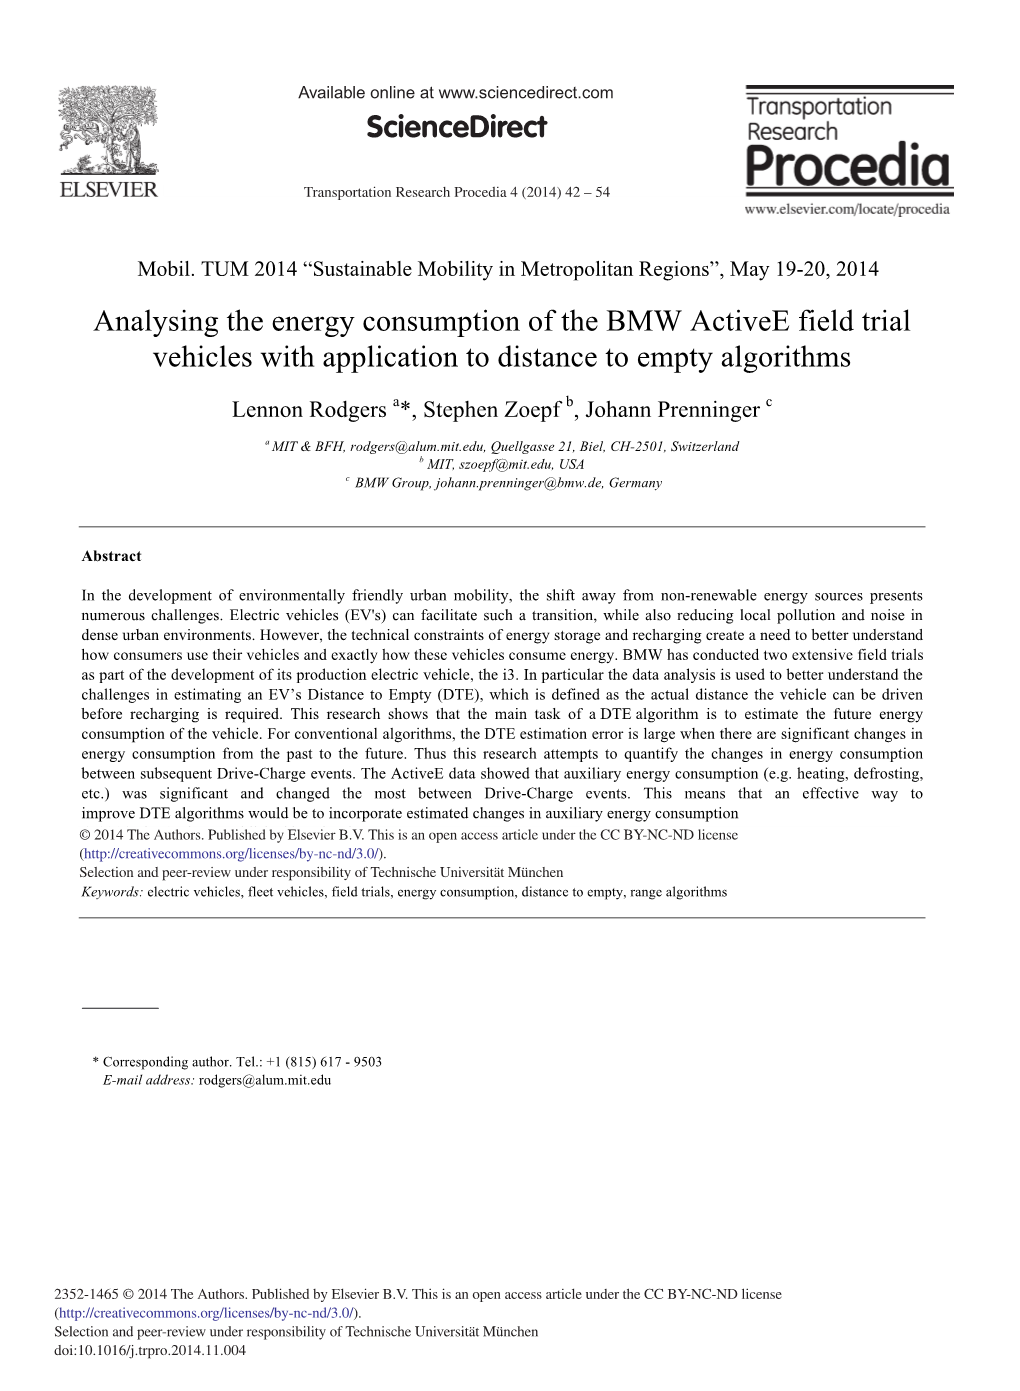 Analysing the Energy Consumption of the BMW Activee Field Trial Vehicles with Application to Distance to Empty Algorithms